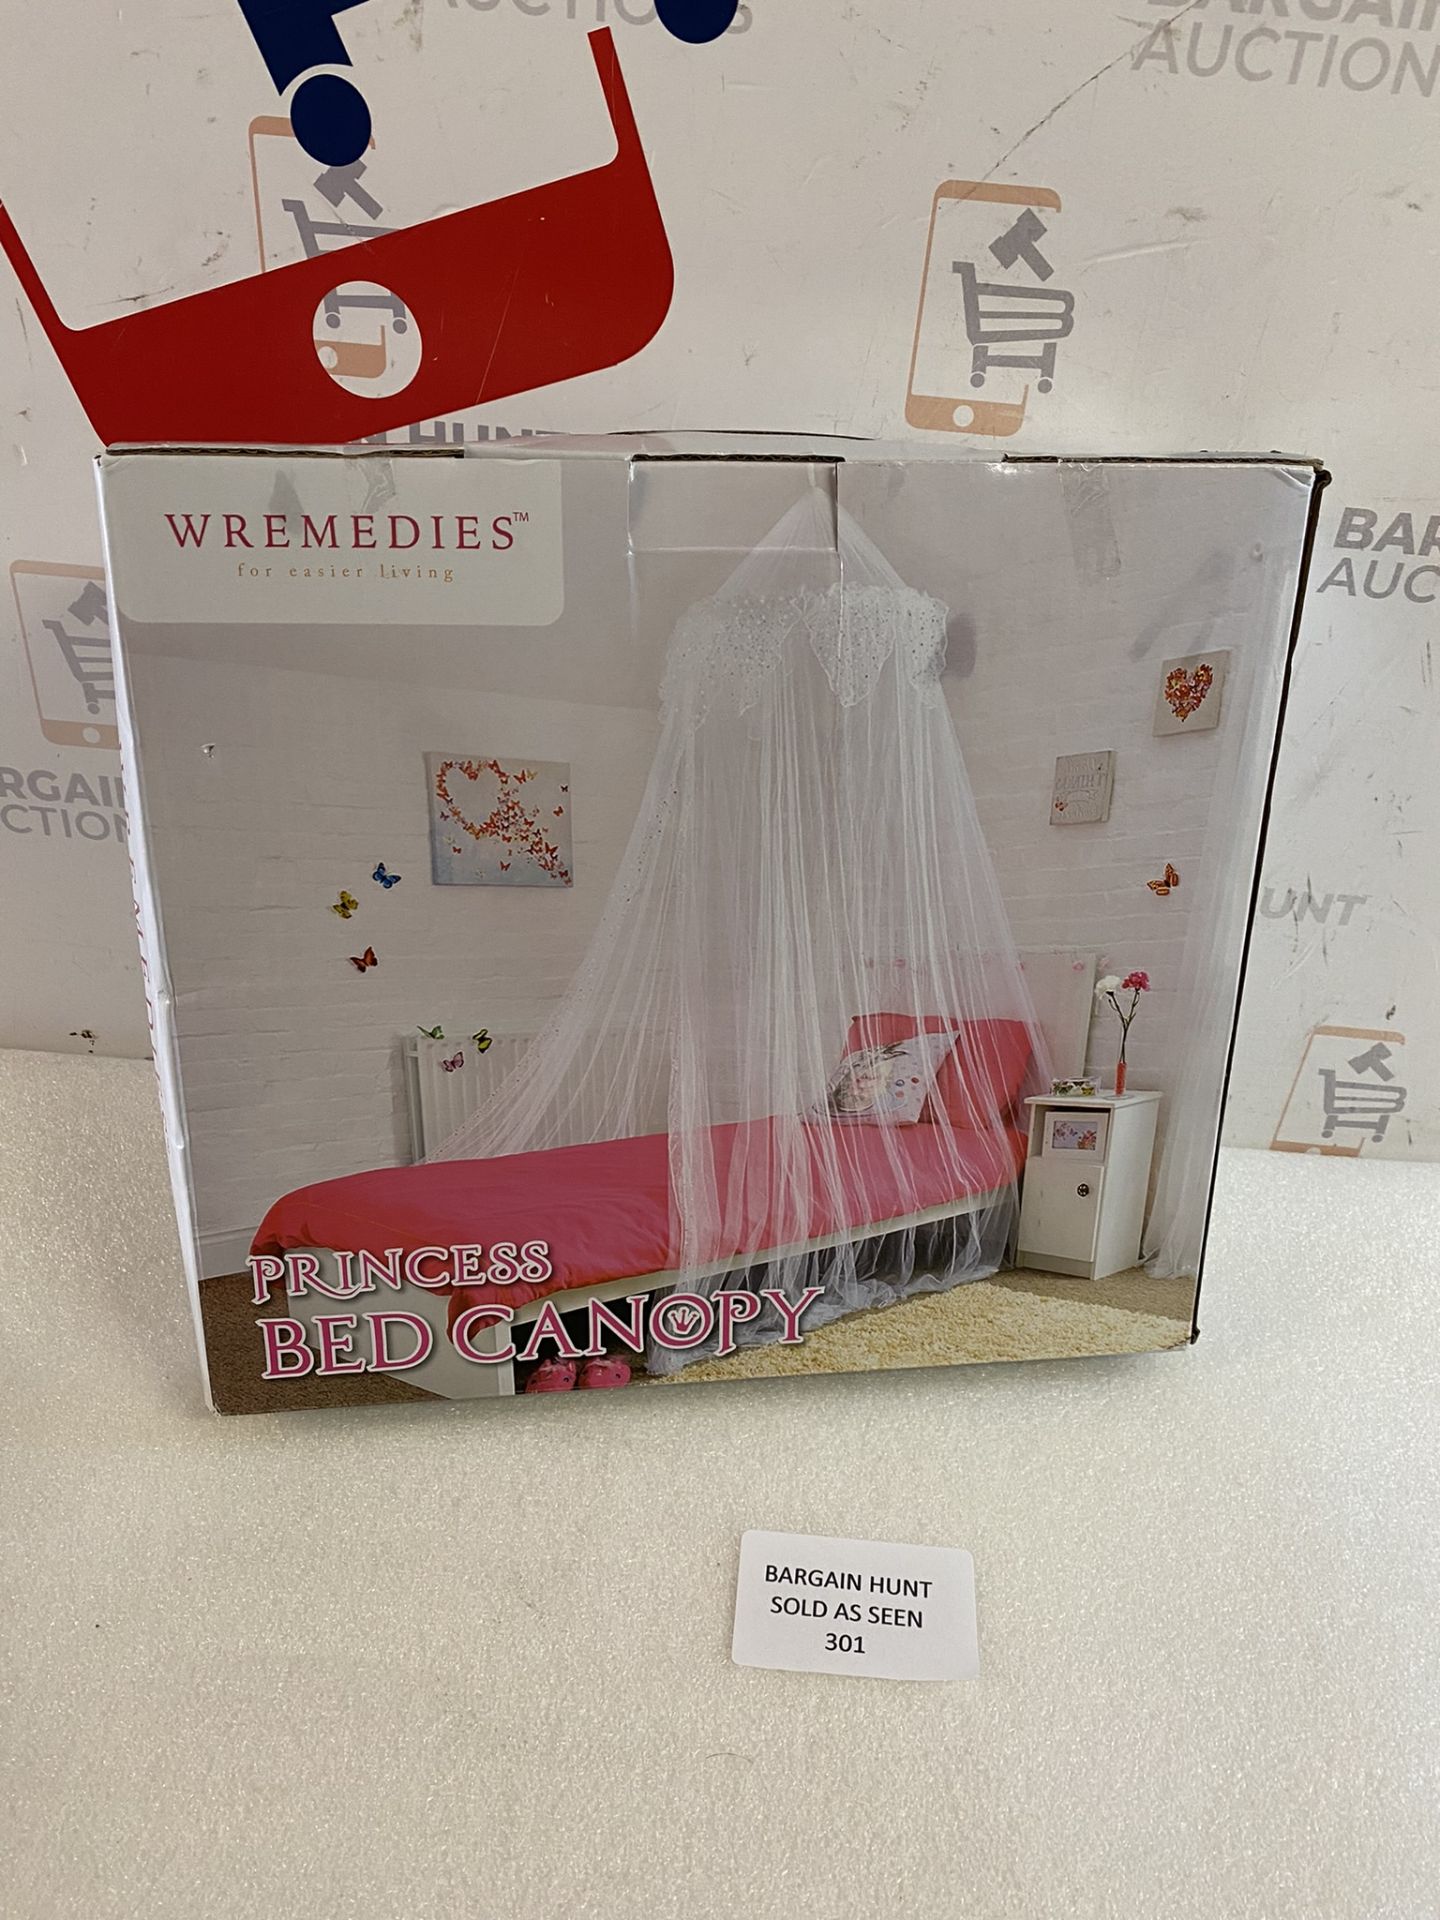 Wremedies Girls Princess Pink Canopy Mosquito Bed Netting RRP £21.99 - Image 2 of 2